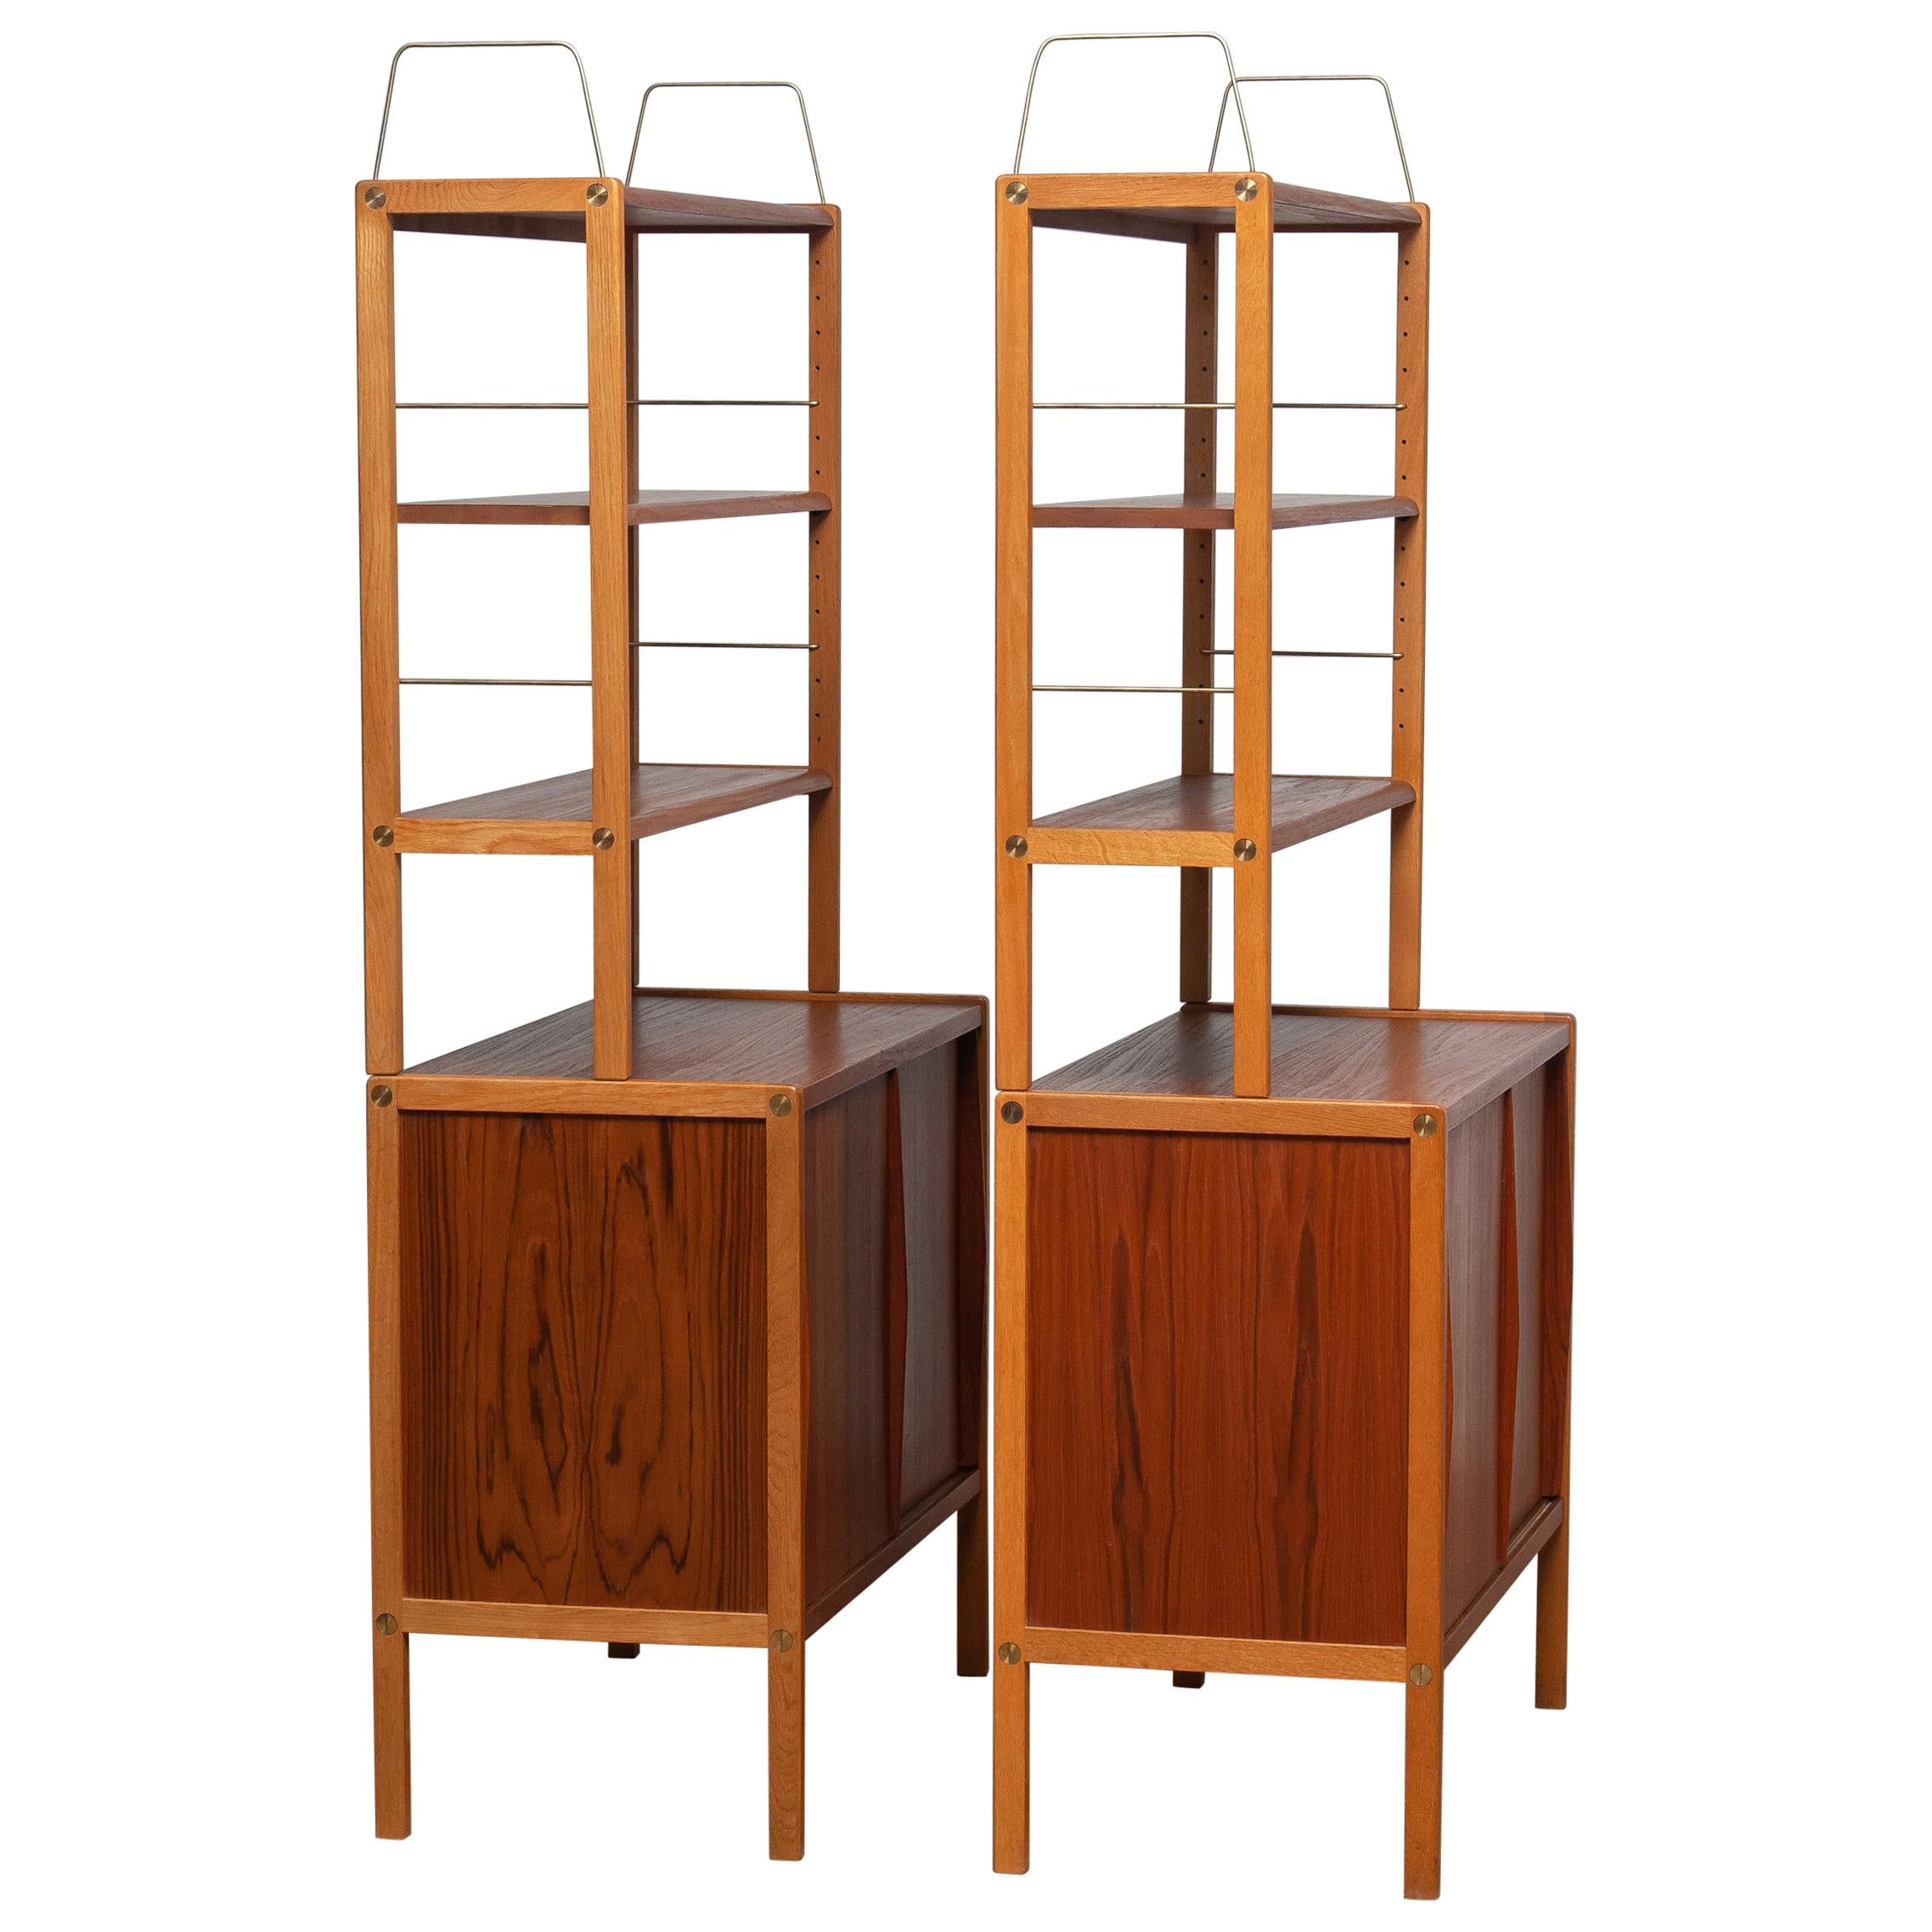 Beautiful and elegant set of two teak bookcases or cabinets with brass details and two sliding doors by Bertil Fridhagen for Bodafors, Sweden, 1960s.

Both lower parts of the cabinets have two sliding doors and inside the original shelves with